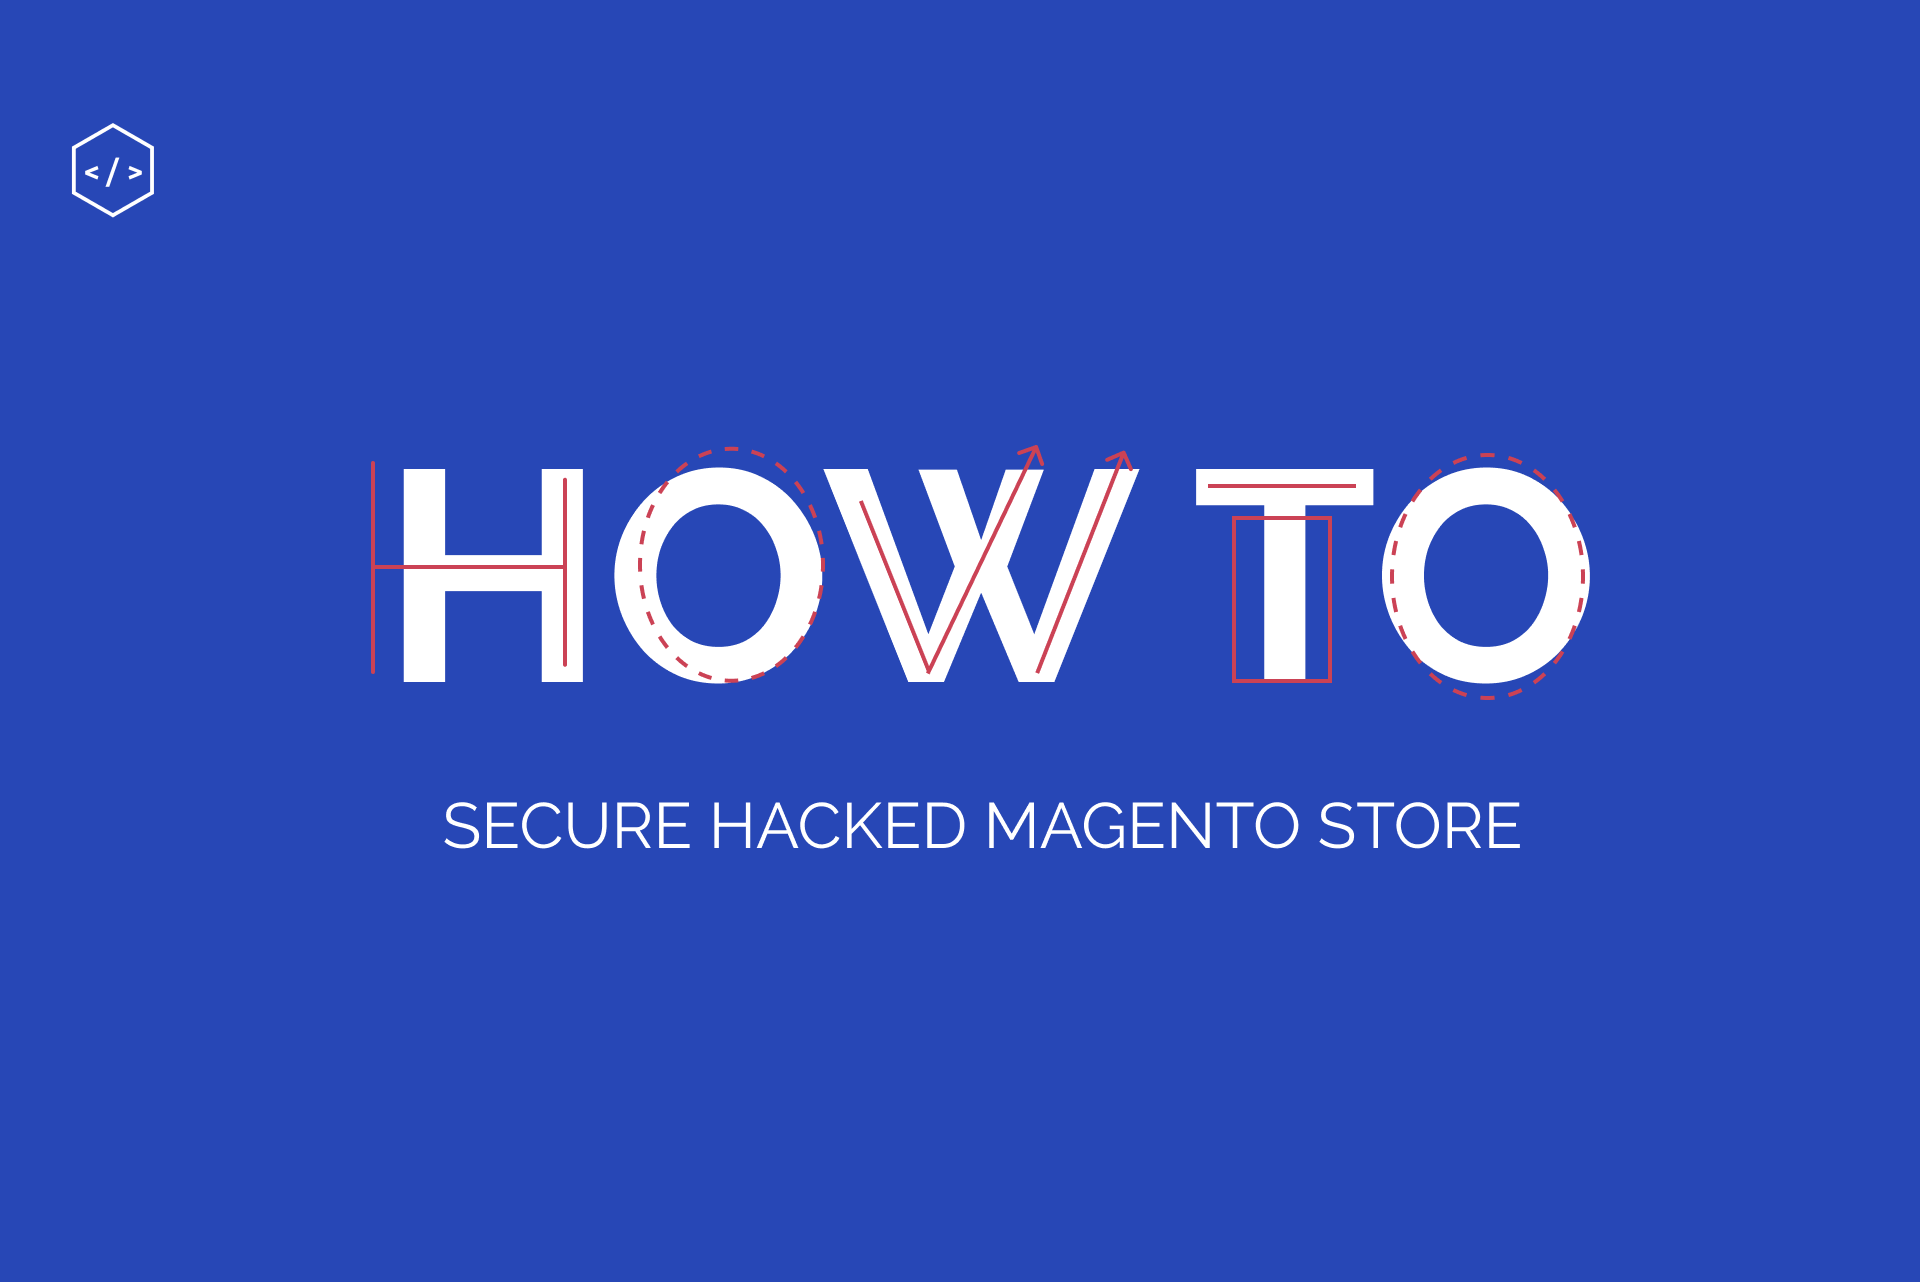 5 tips to secure hacked Magento store and prevent further damage